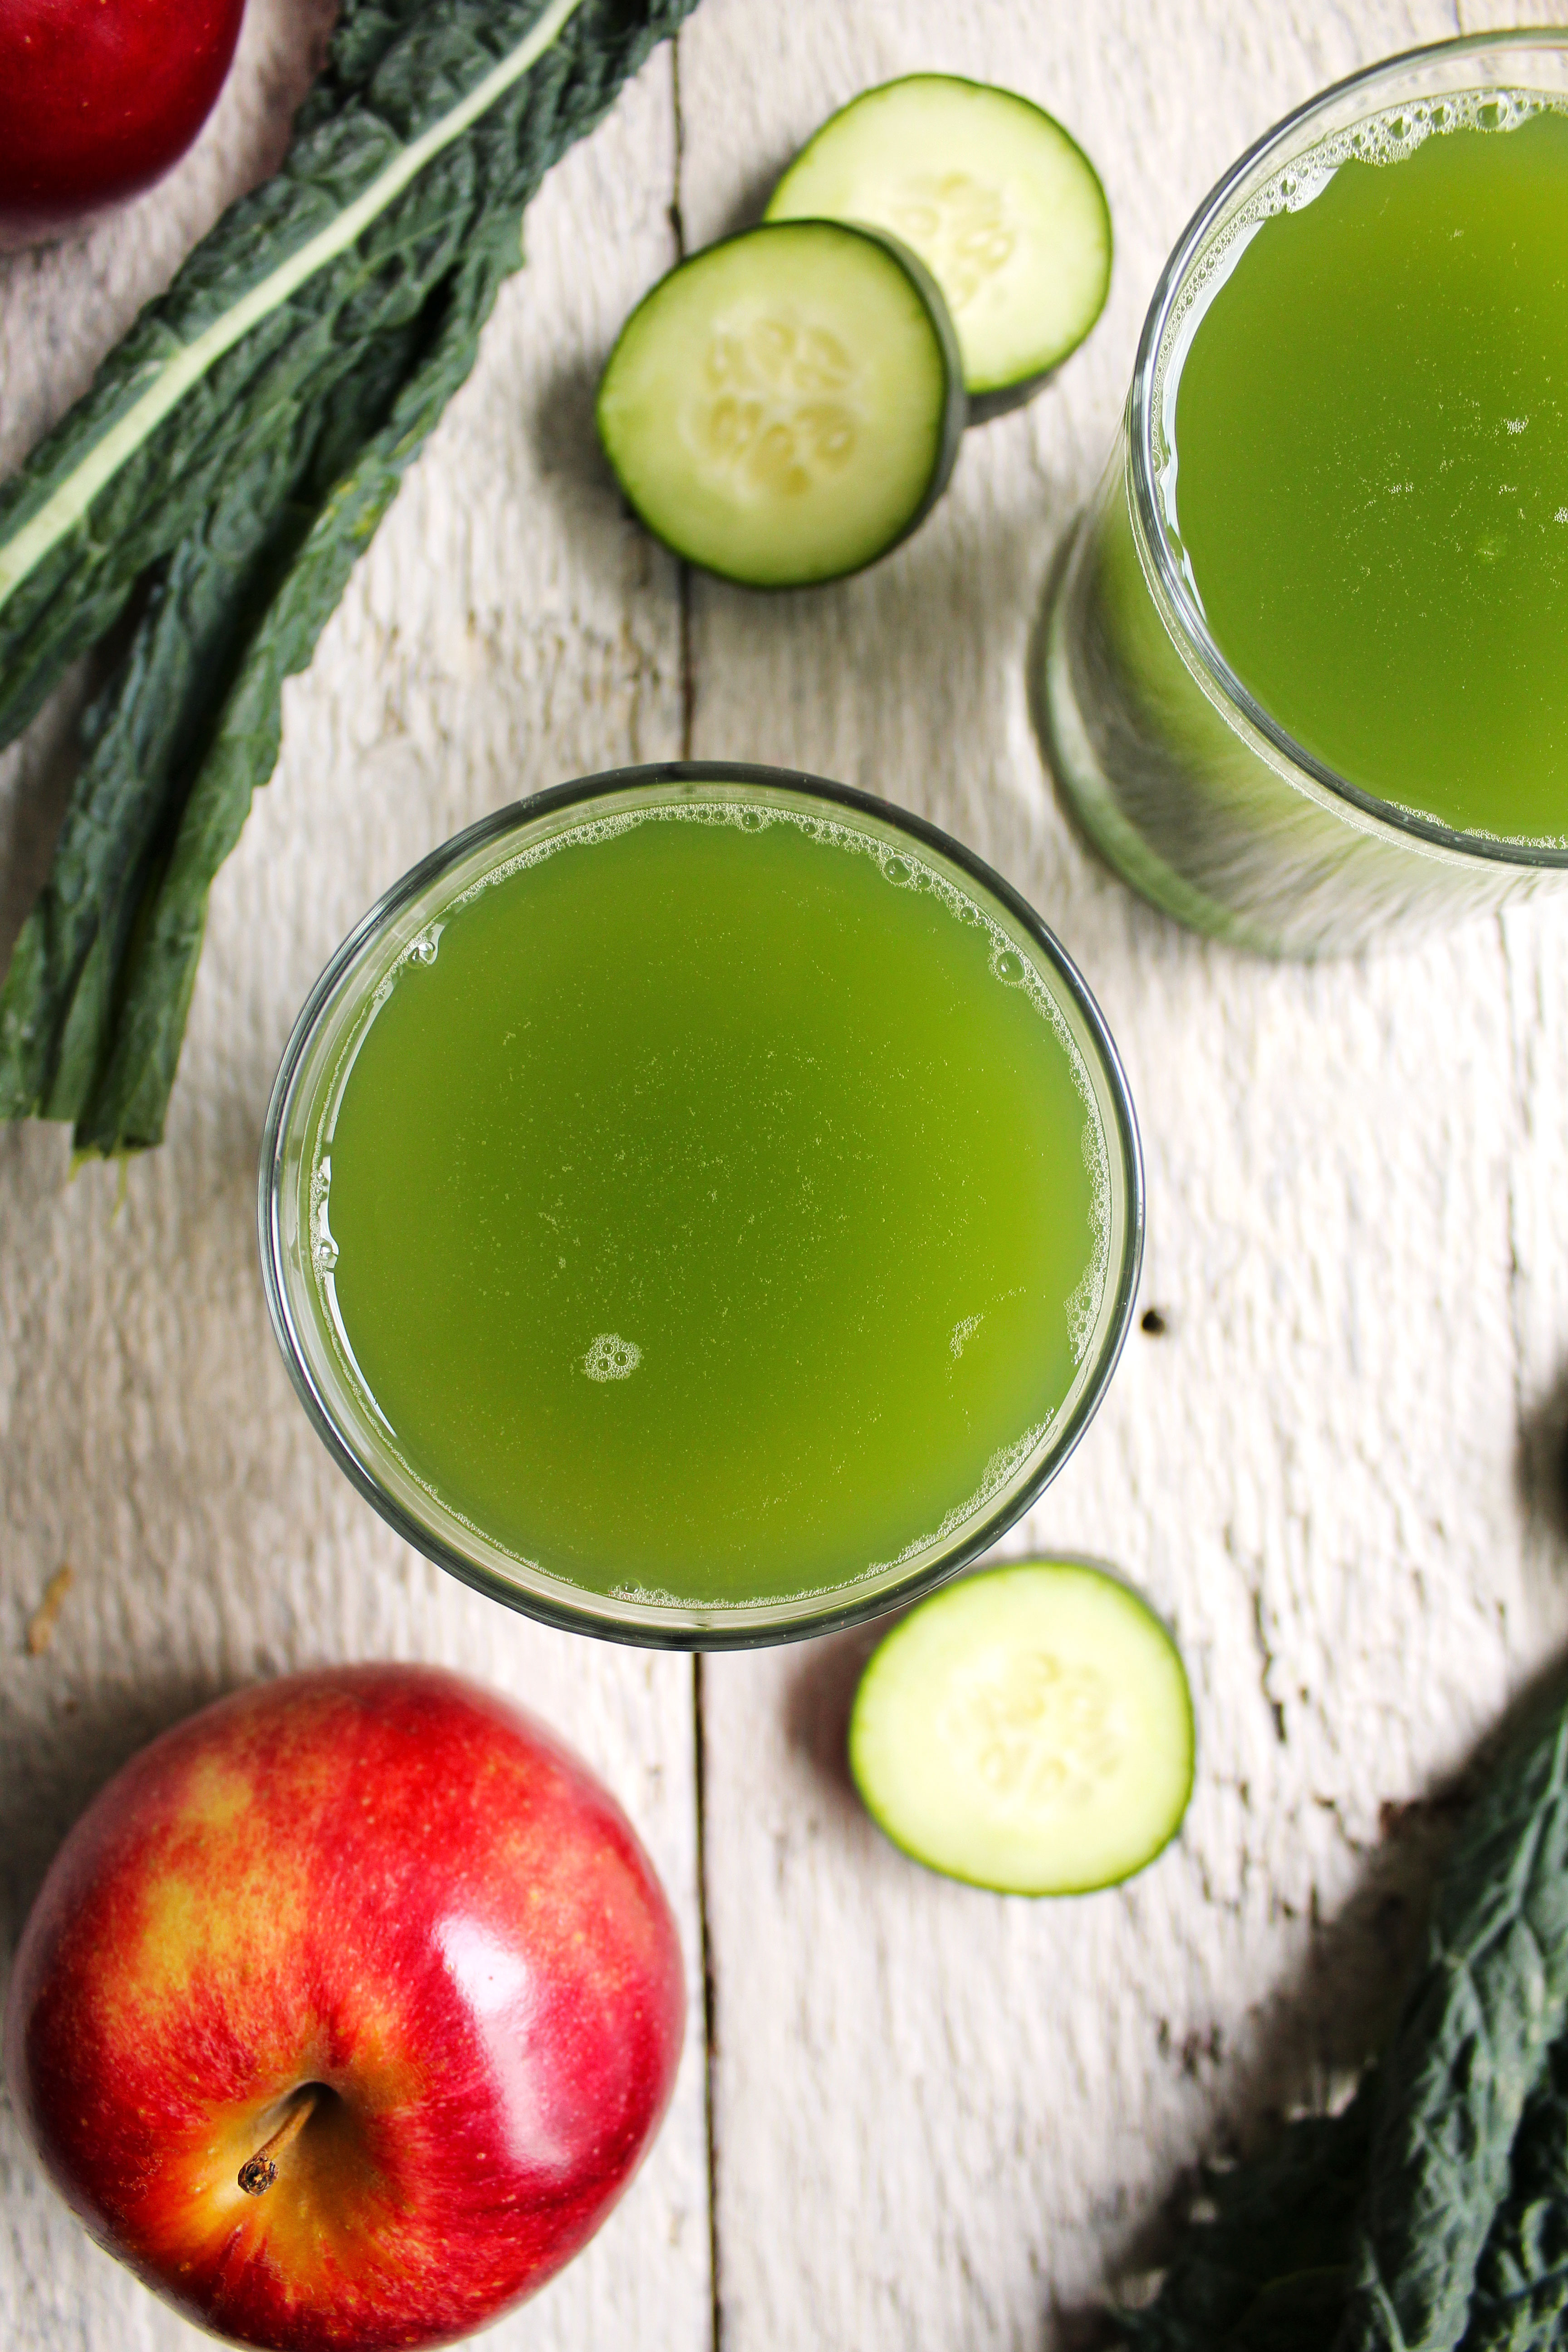 DELICIOUS Kale Apple Ginger Green Juice! Your new green juice recipe WITHOUT a juicer! Perfectly sweet + a spicy kick from ginger! YES! #vegan #glutenfree #recipe | peachandthecobbler.com